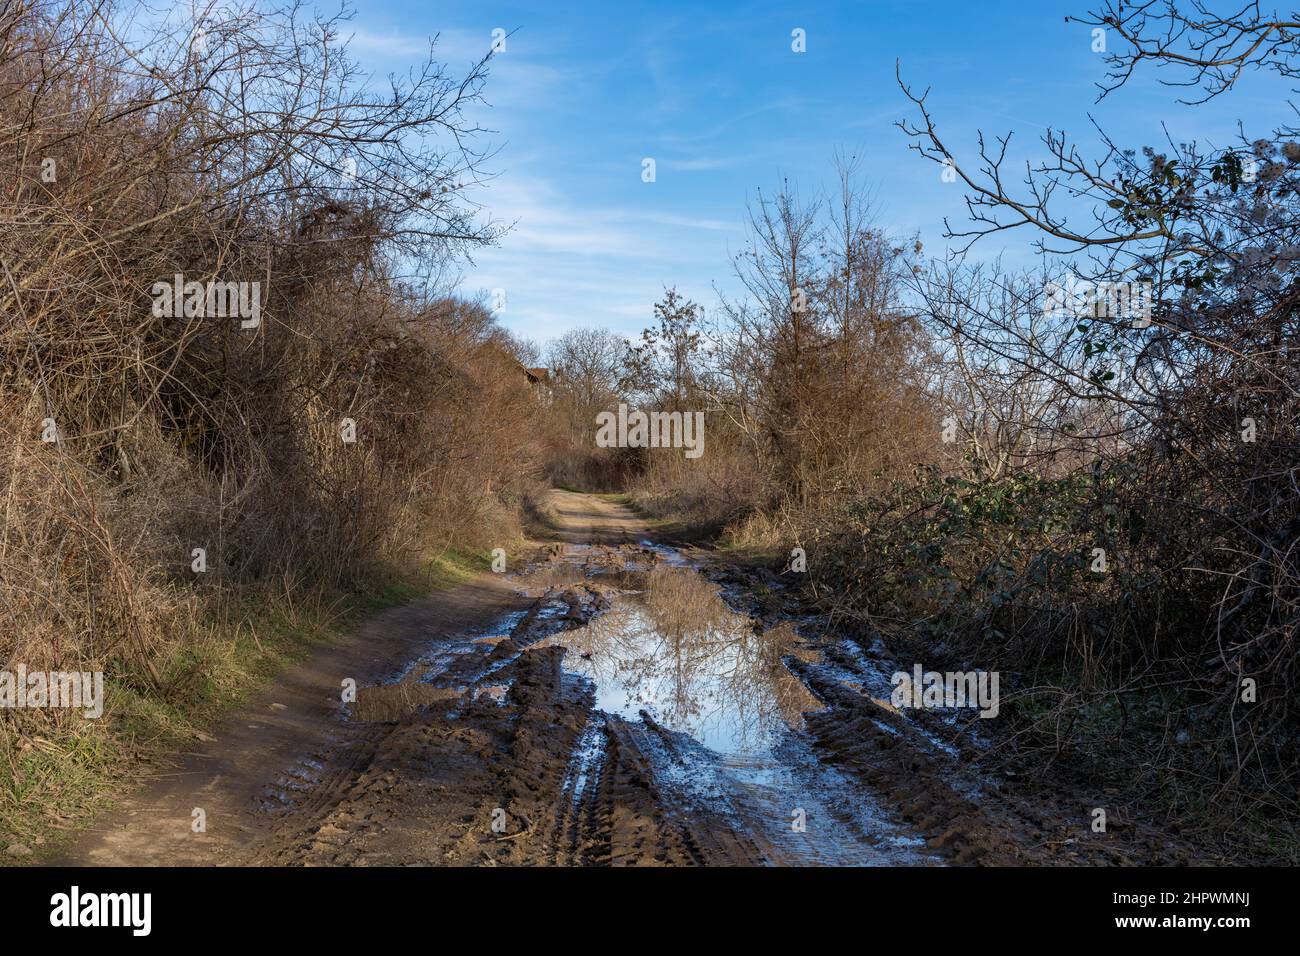 A country road with ruts and puddles, curbs overgrown with trees and bushes on a sunny spring day in the village Stock Photo